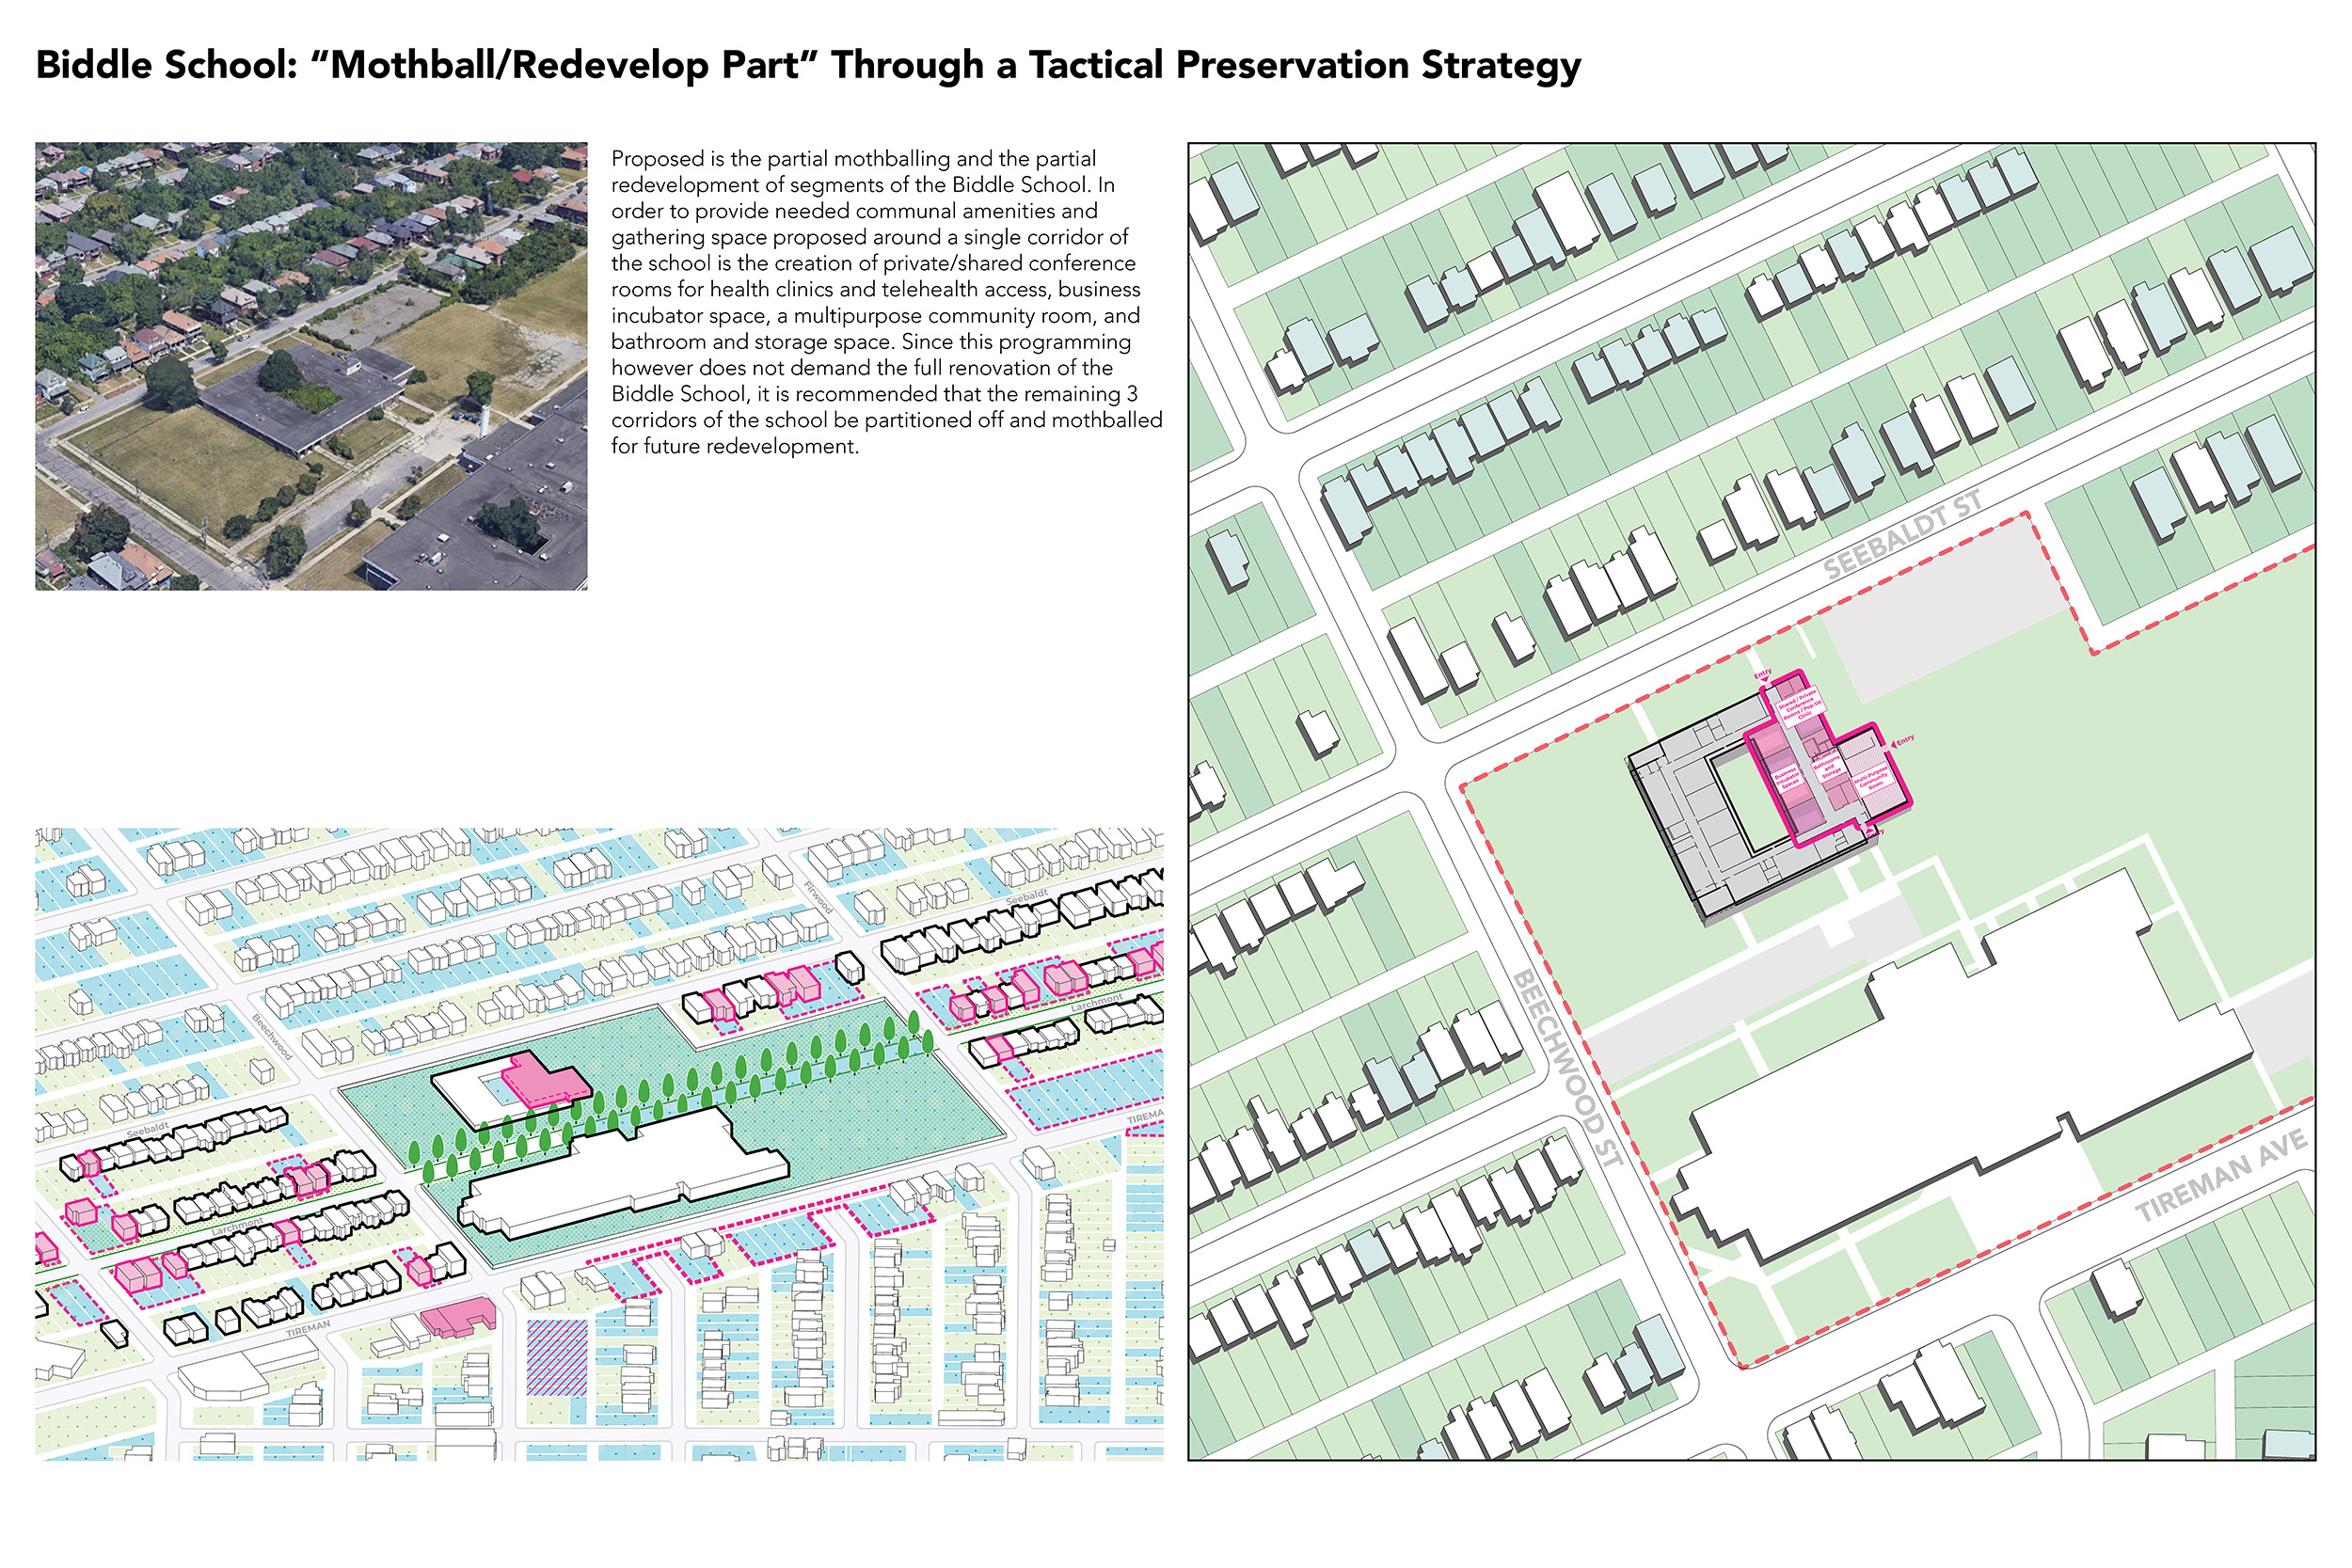 A diagram mapping the tactical preservation strategy of Biddle School in Detroit, MI.